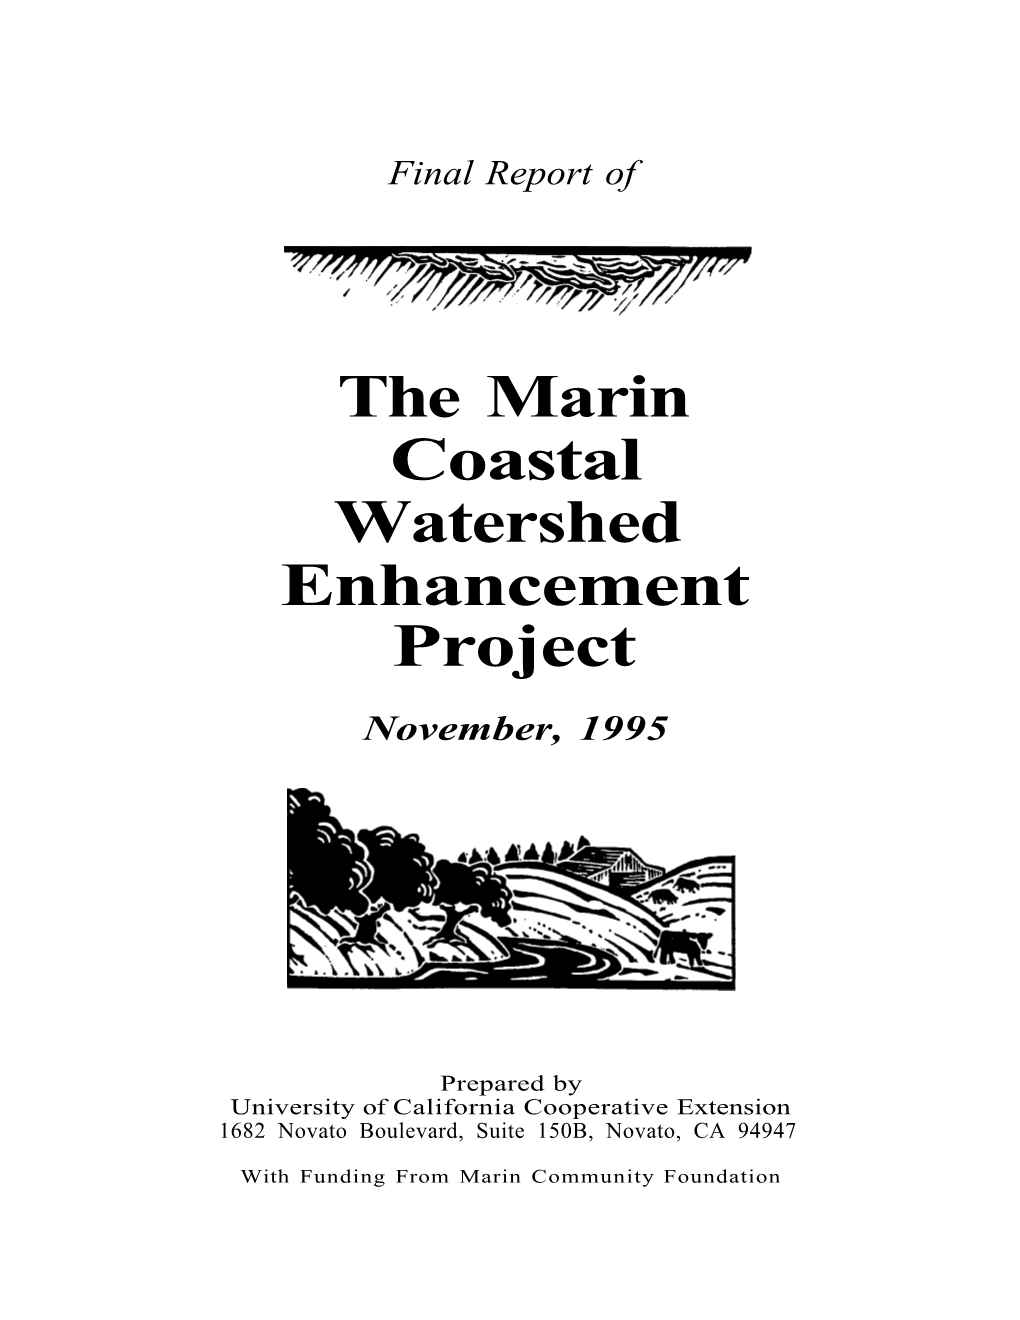 UCCE. the Marin Coastal Watershed Enhancement Project